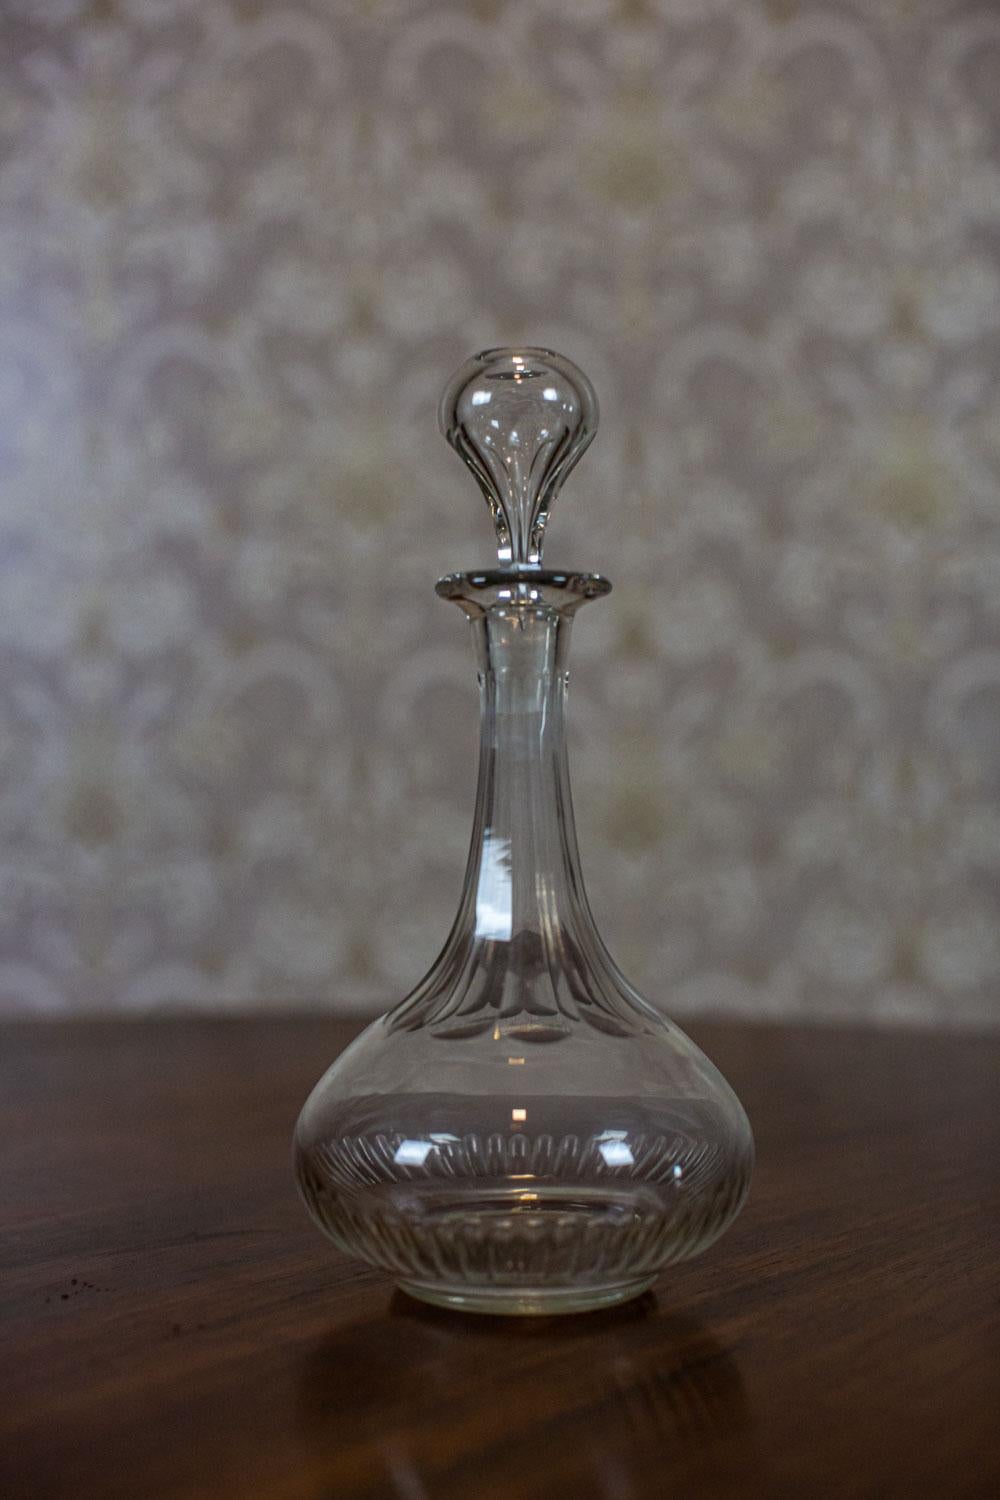 Decorative Crystal Liquor Decanter from 1918-1938

We present you this crystal decanter from the Interwar period.

The item is in incredibly good condition and undamaged.